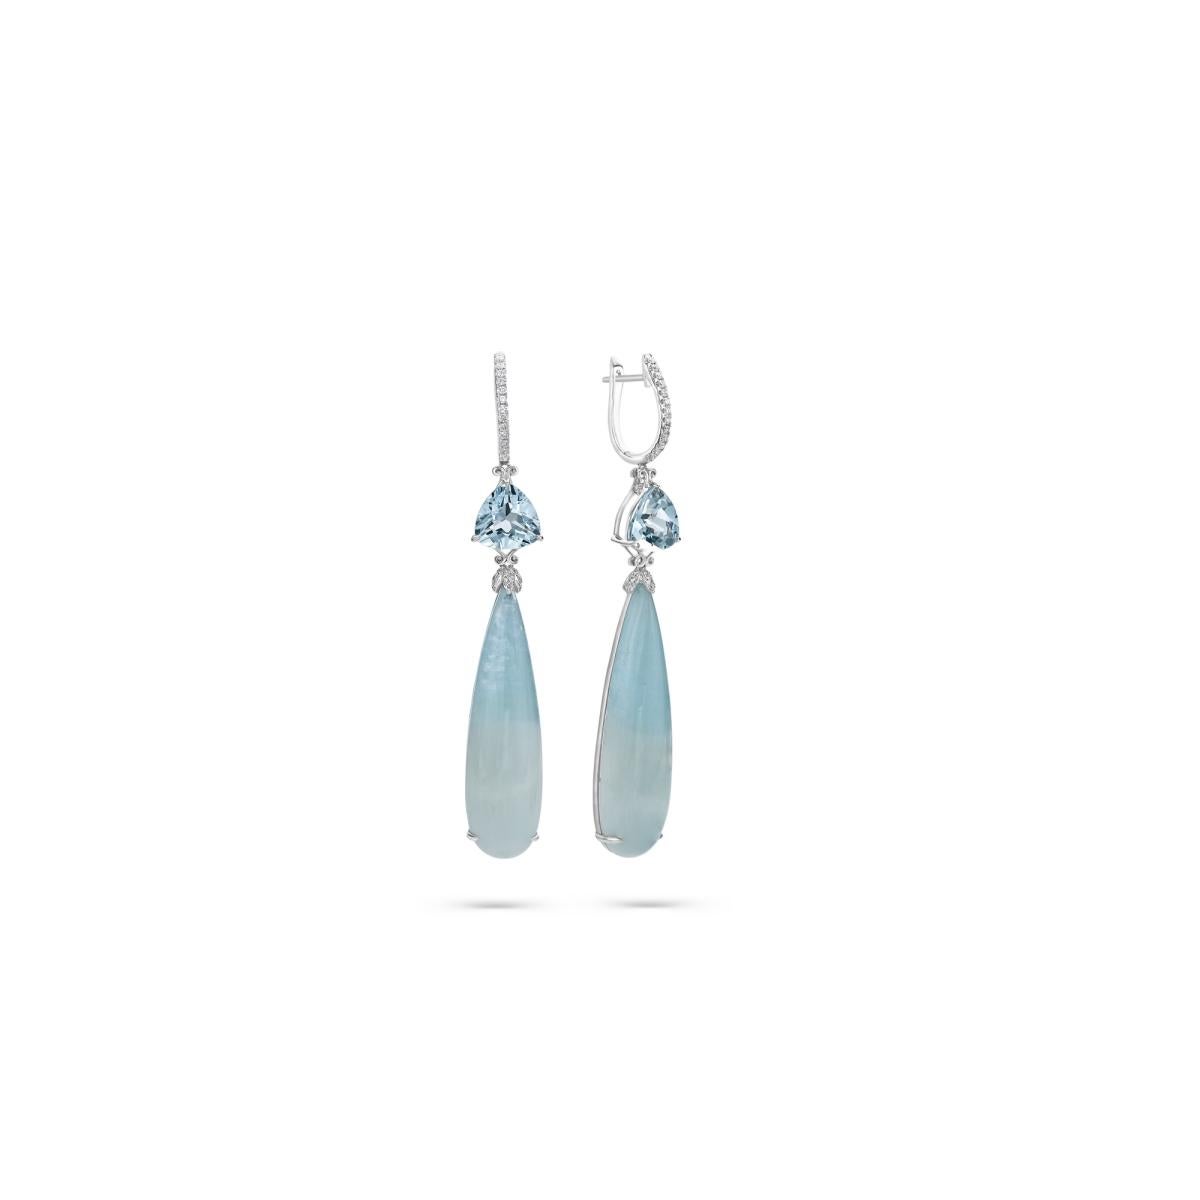 Aquamarine, it is written into Ancient Greek mythology that Aquamarine washed ashore from the toppled treasure chests of the sirens, Aquamarine that carried the surge of strong healing vibes that brought great relief to the body, mind and soul.

The